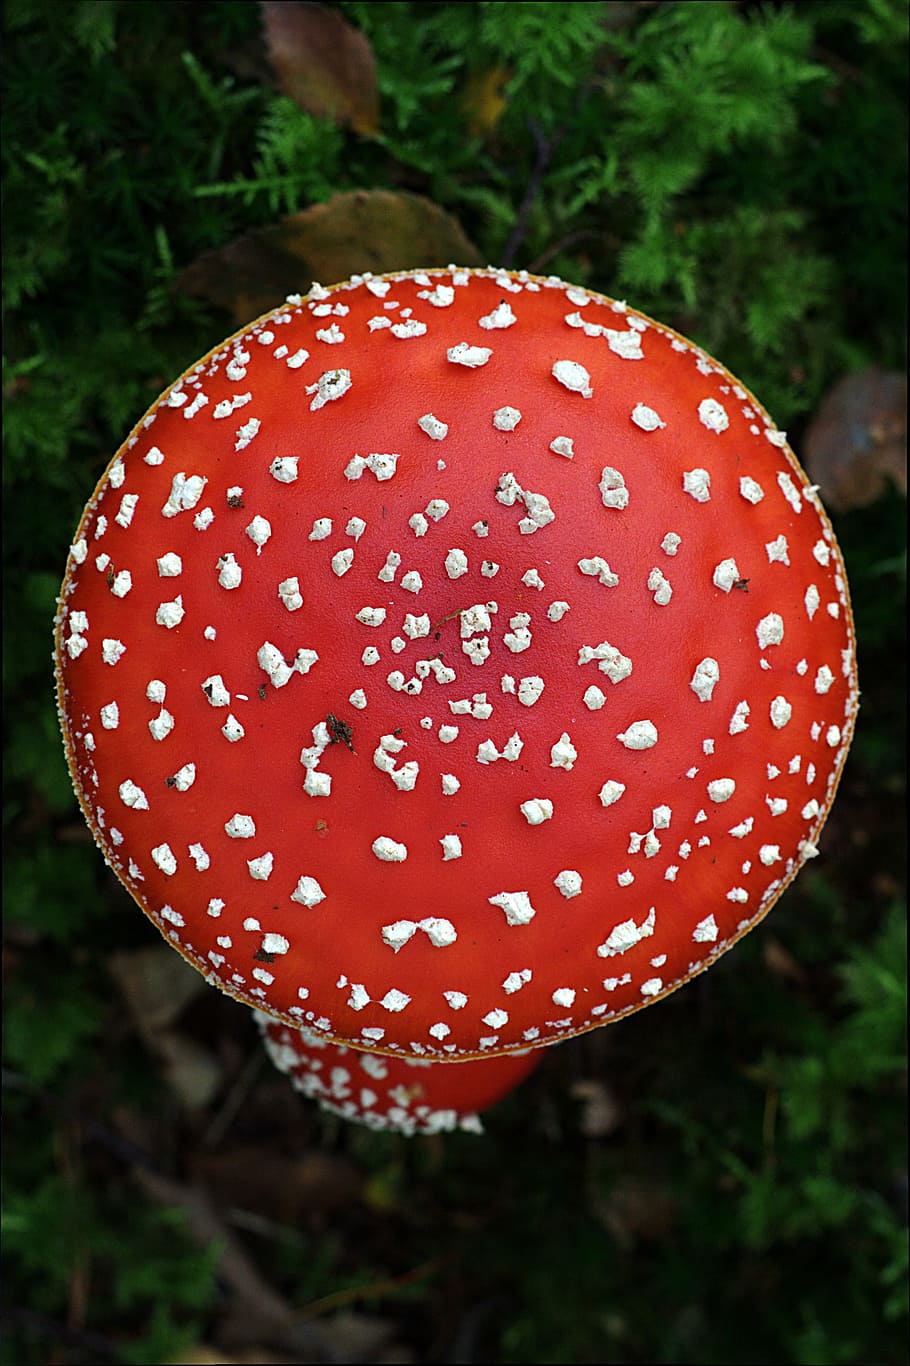 fly agaric, mushroom, autumn, amanita muscaria, red, fungus, fly agaric mushroom, spotted, close-up, growth